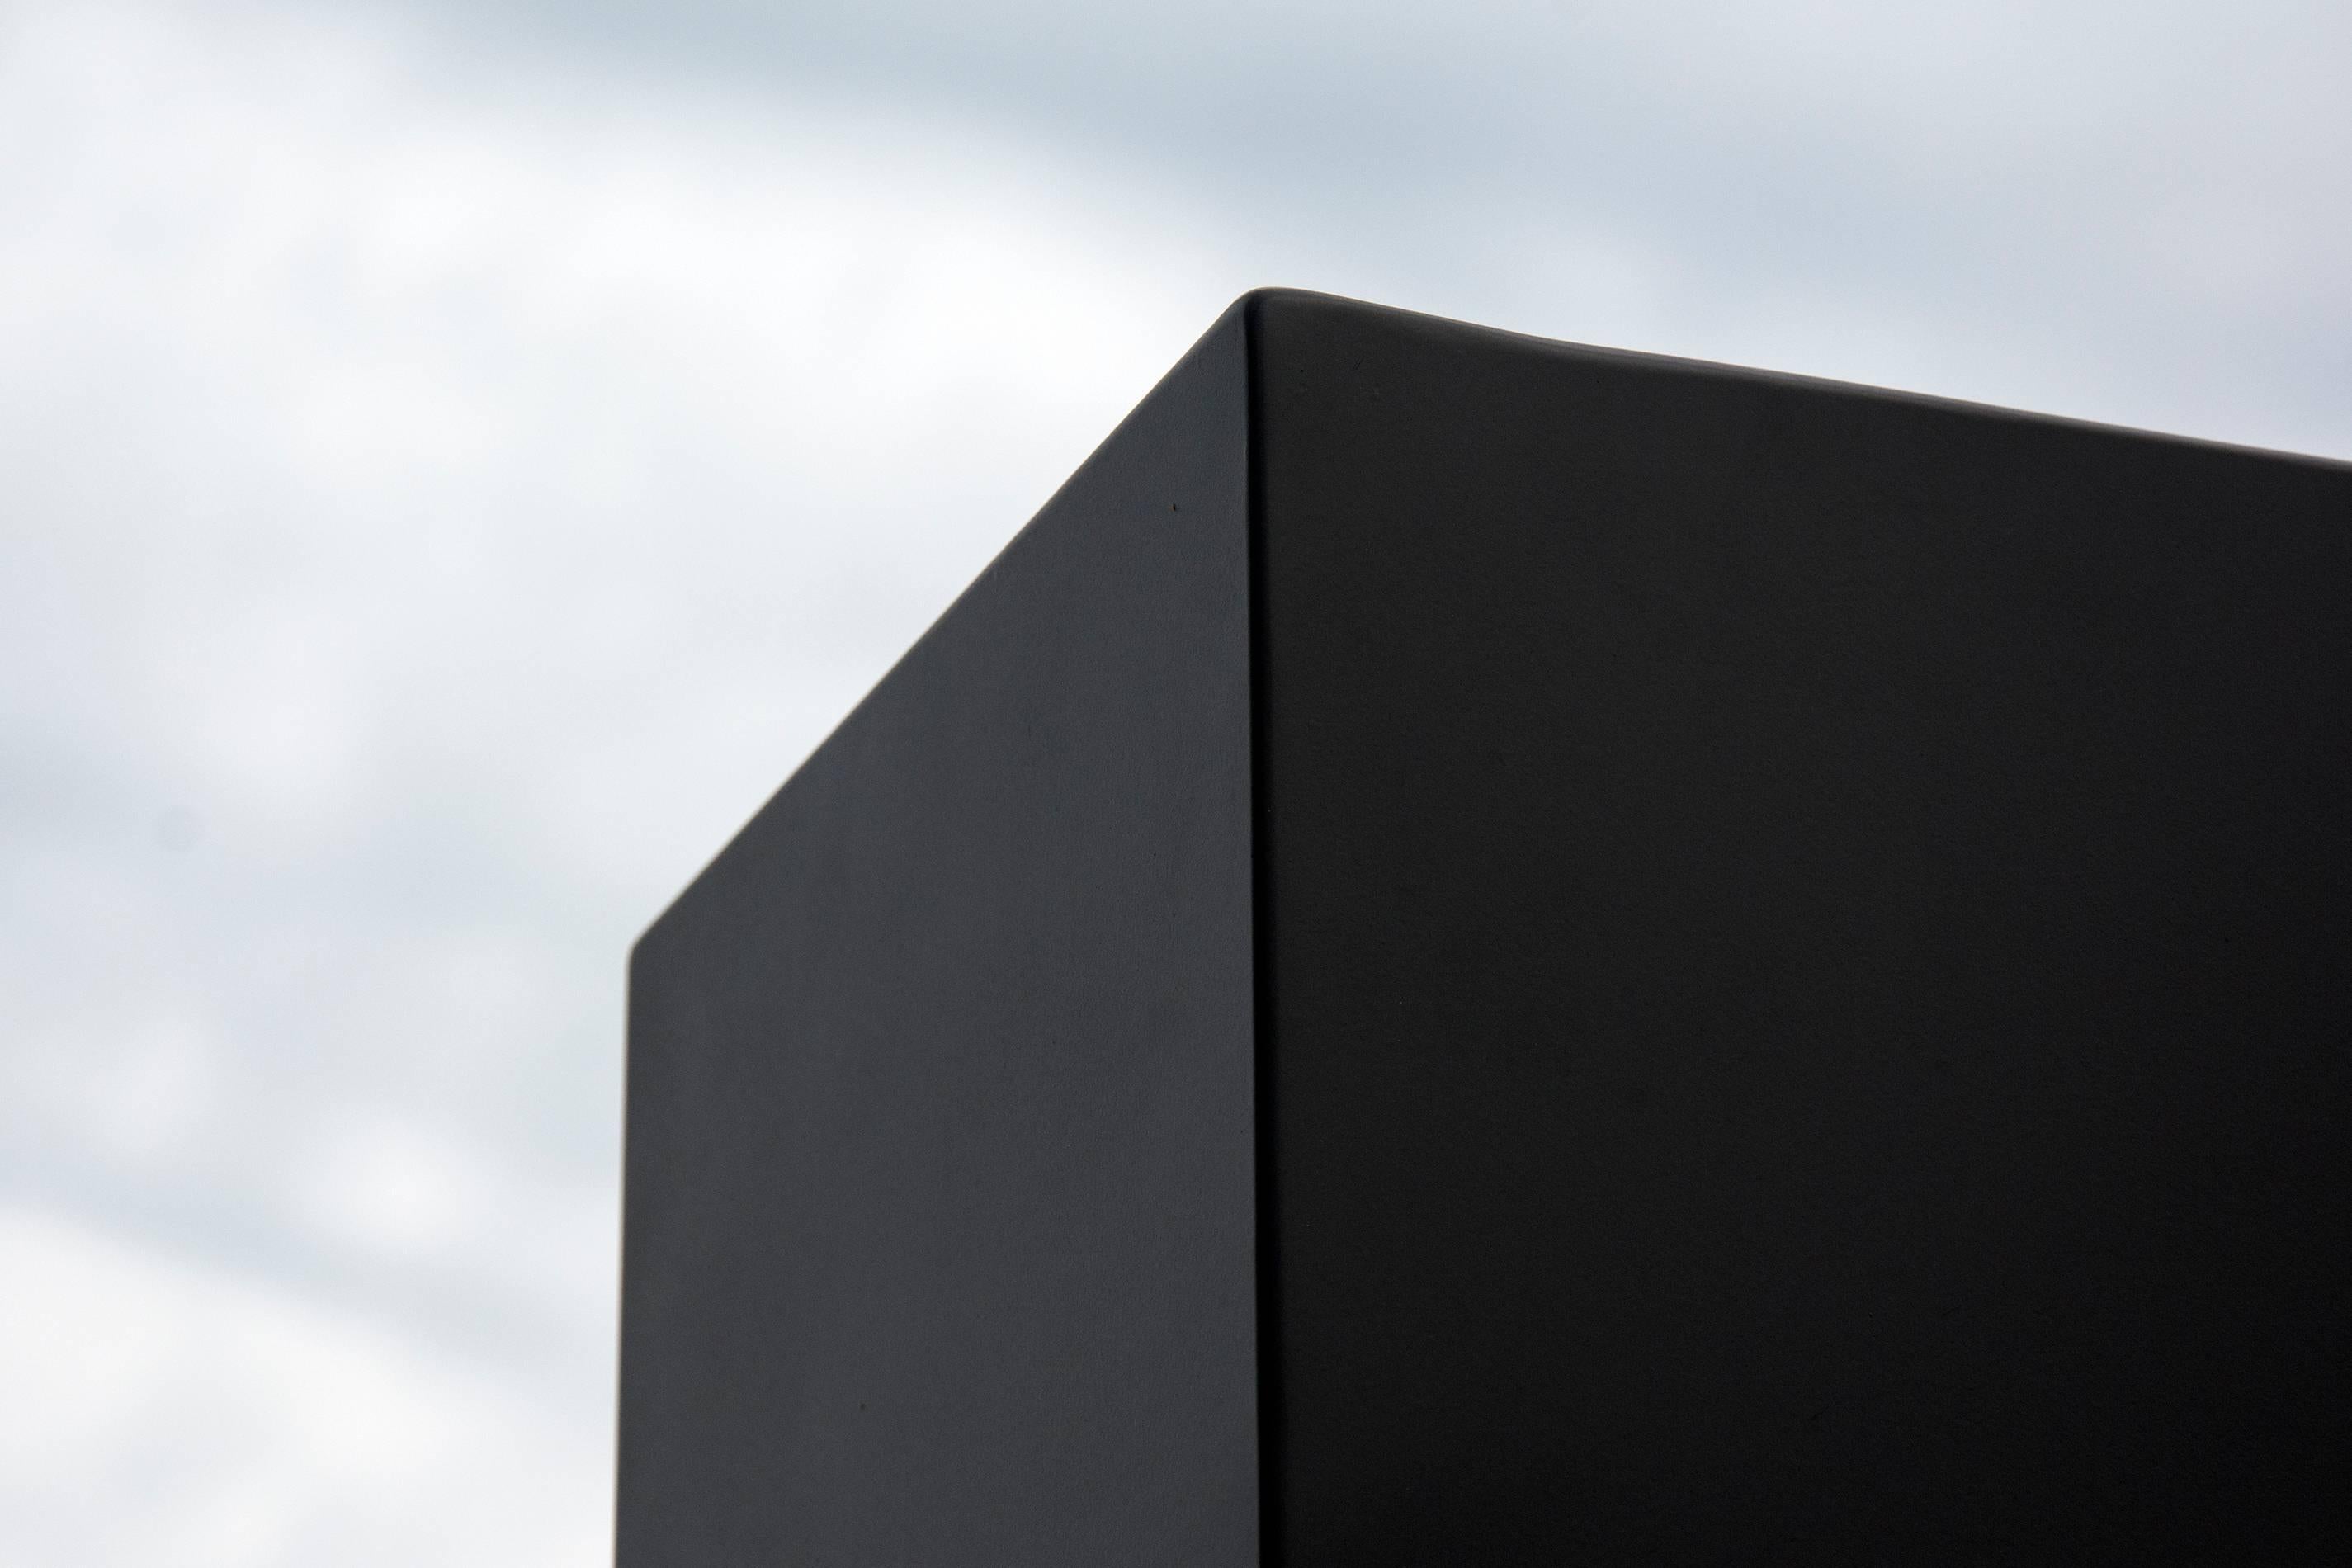 This piece is titled 'Aquagraphie' in French which translates to 'Water Writing'. A rectangular, steel outdoor sculpture in black is divided into three parts, like a puzzle, the edges polished and reflective. This seven-foot upright is mirrored in